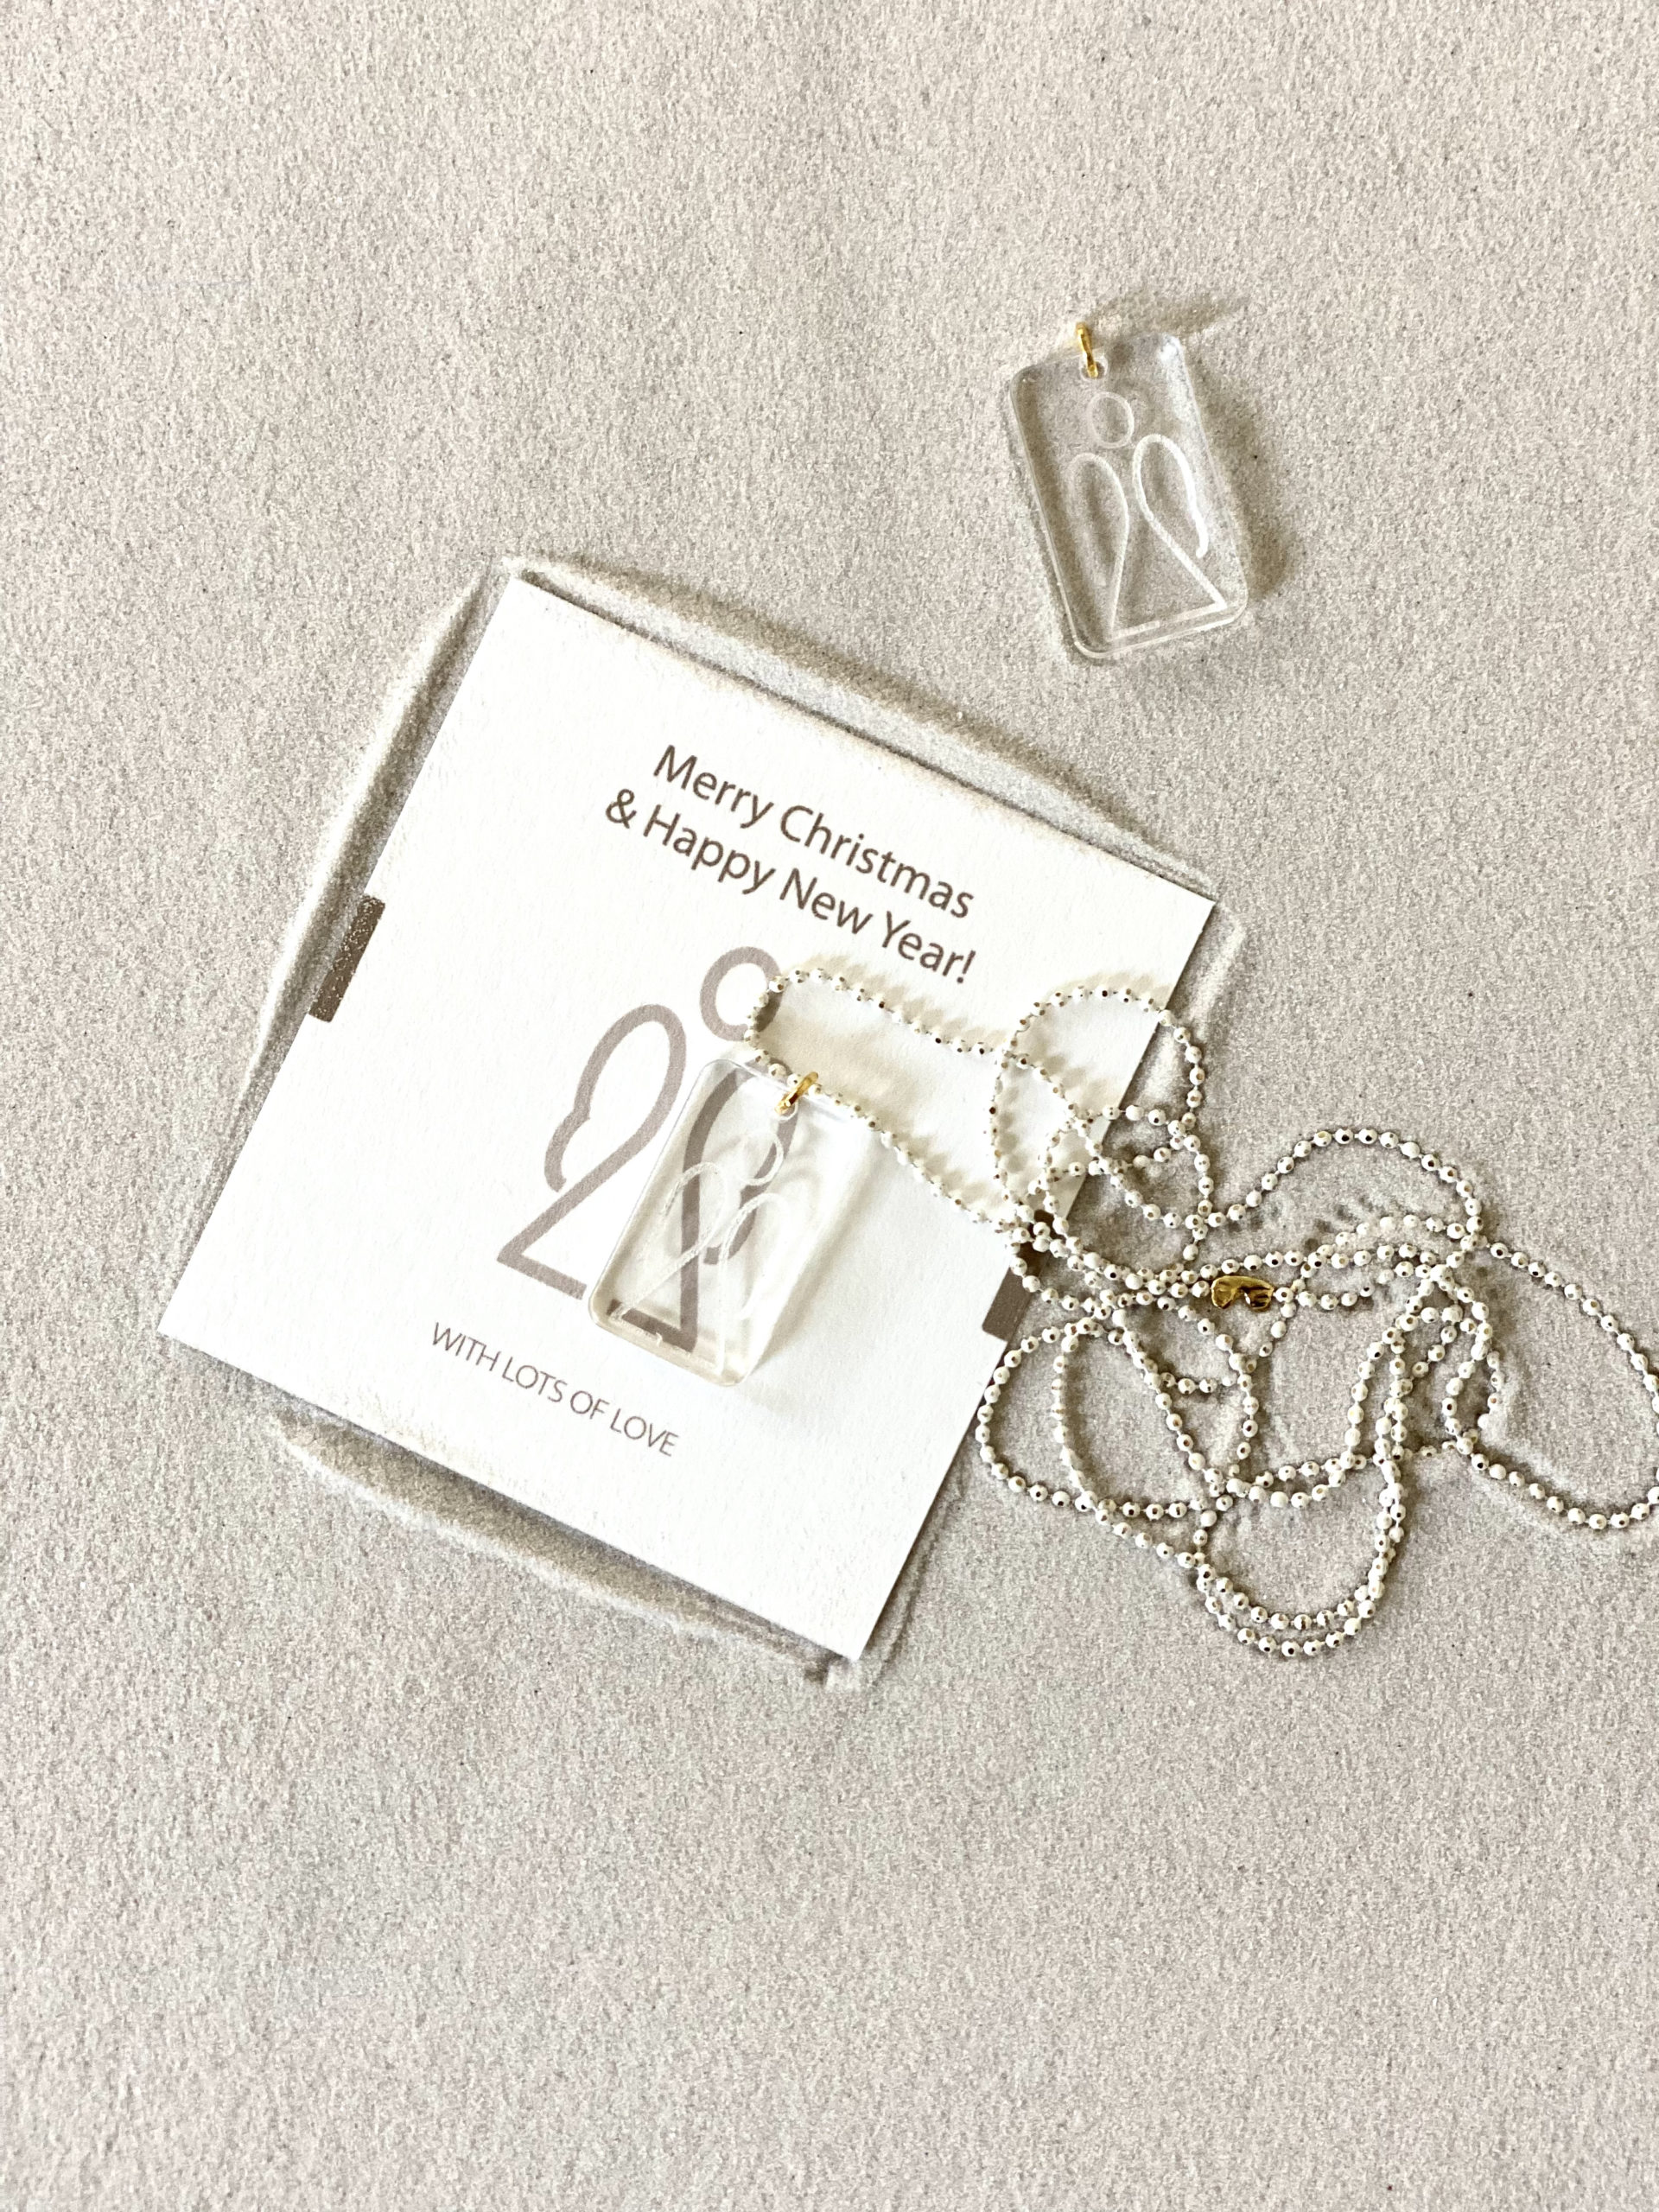 white-christmas-special-occasion-charm-angel-22-chain-necklace-with-card